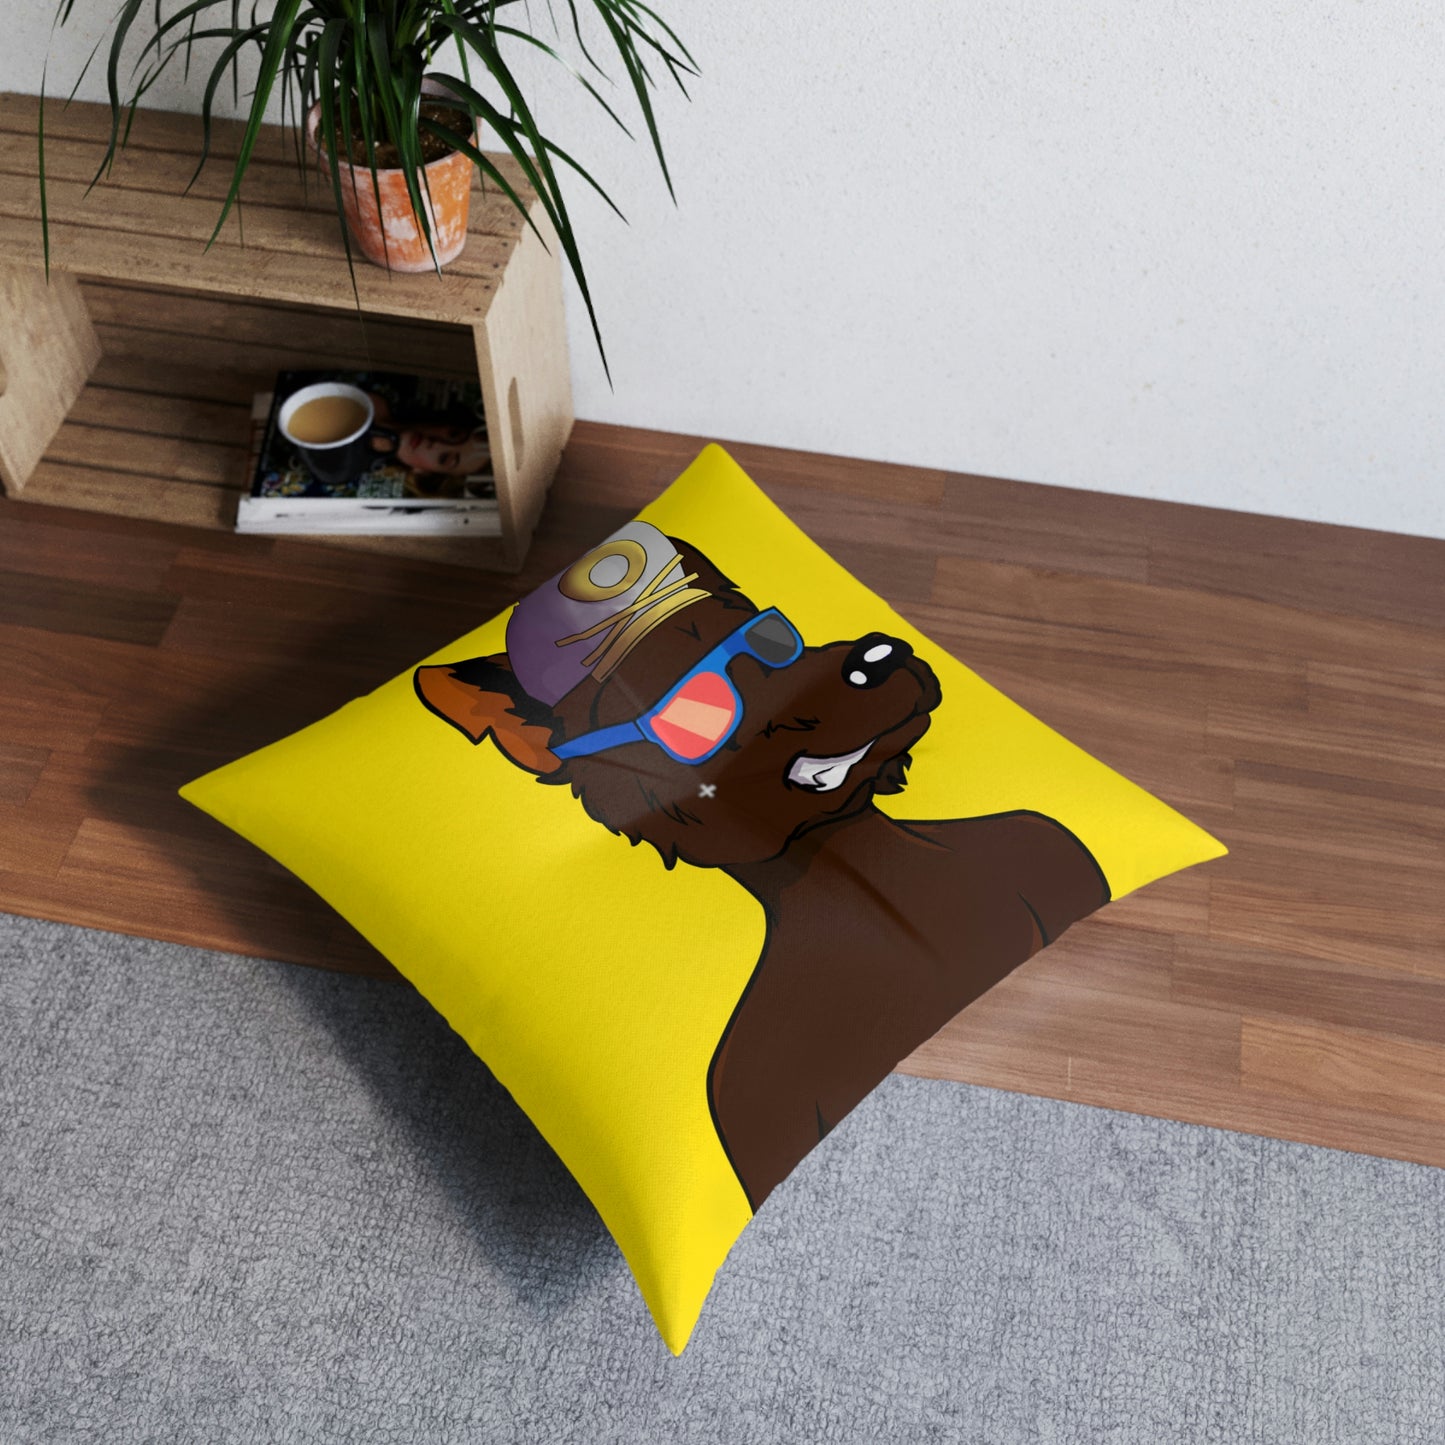 Wolf Cyborg Sailor Hat Shirtless Sunglasses Brown Fur Tufted Floor Pillow, Square